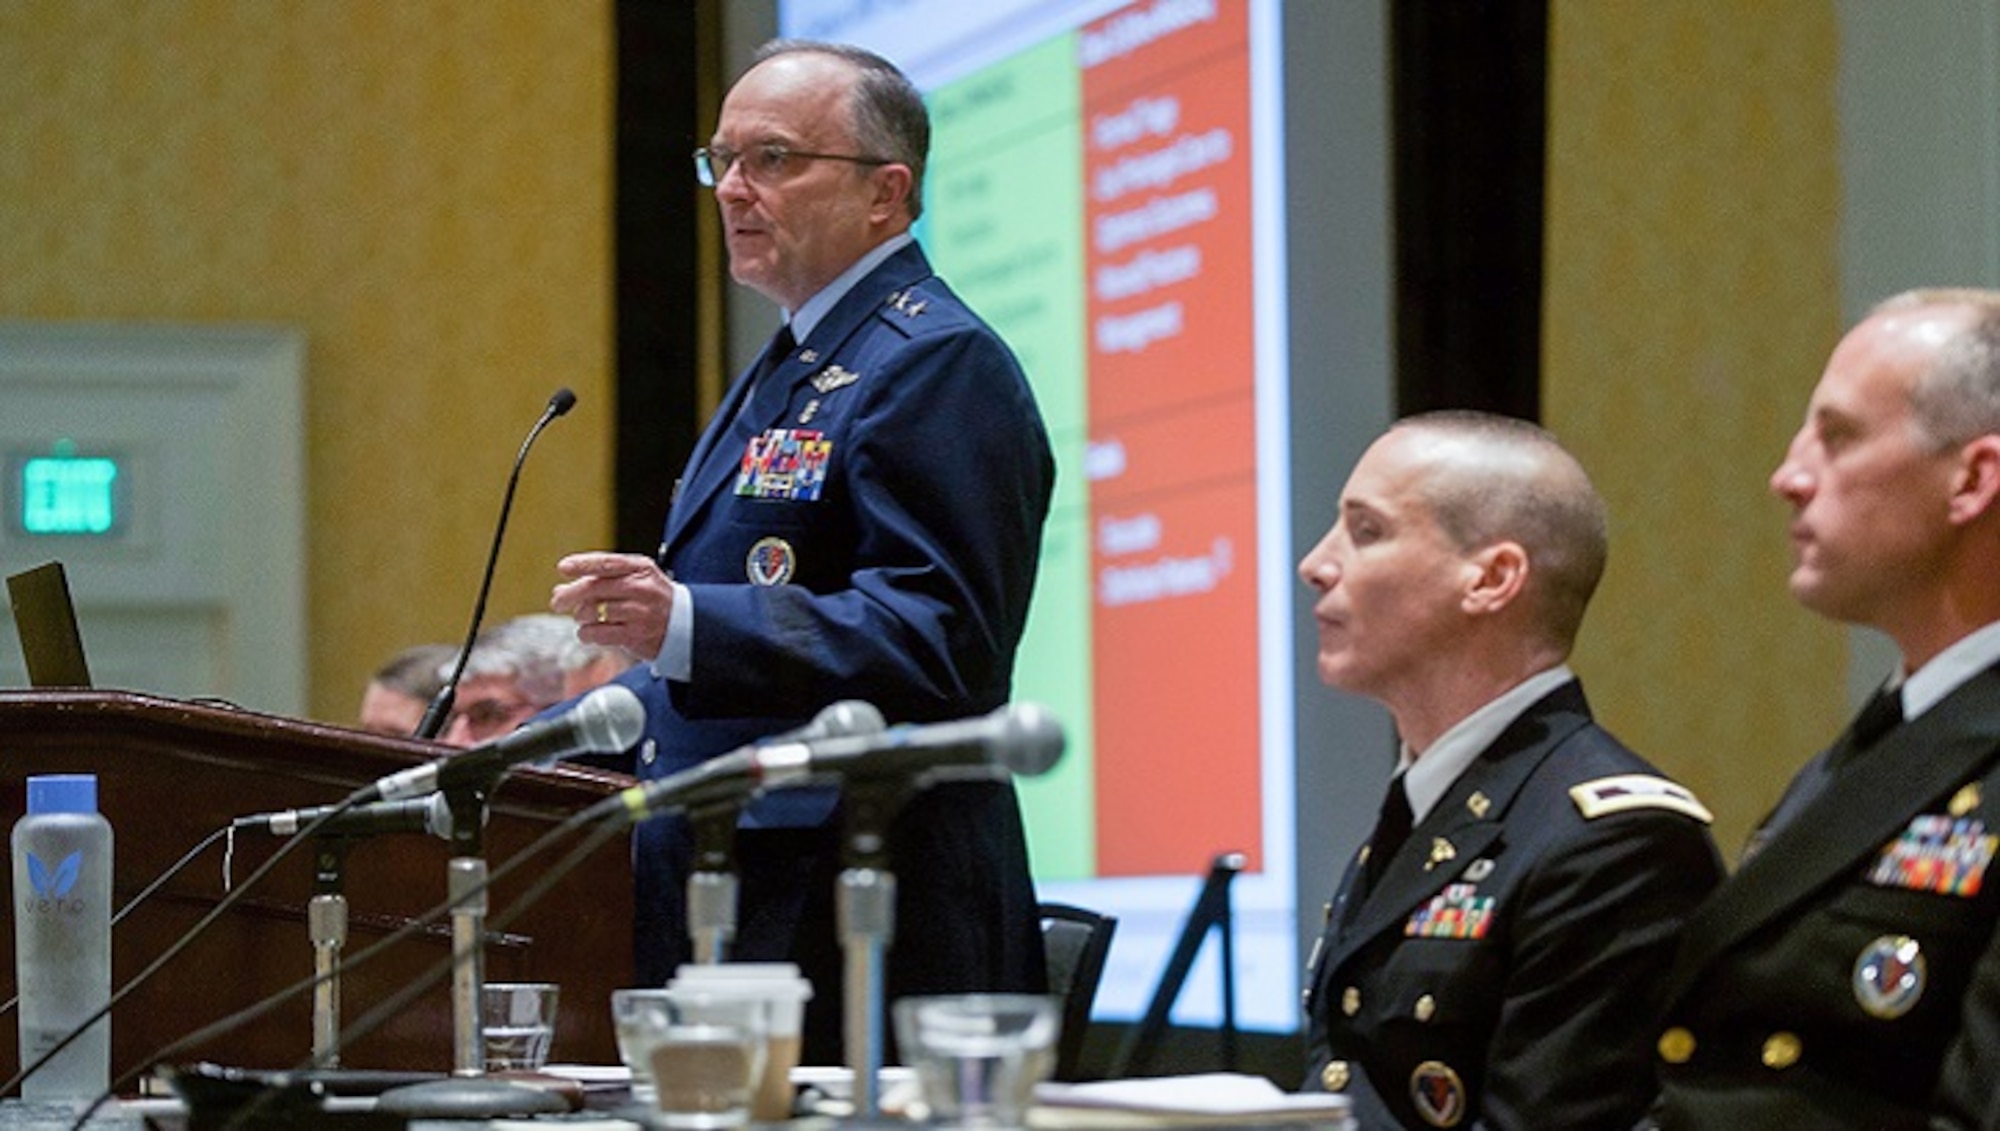 U.S. Air Force Maj. Gen. Lee Payne, assistant director of DHA's Combat Support Agency, moderates a panel presentation on Wednesday, August 21 at MHSRS. (MHS photo)